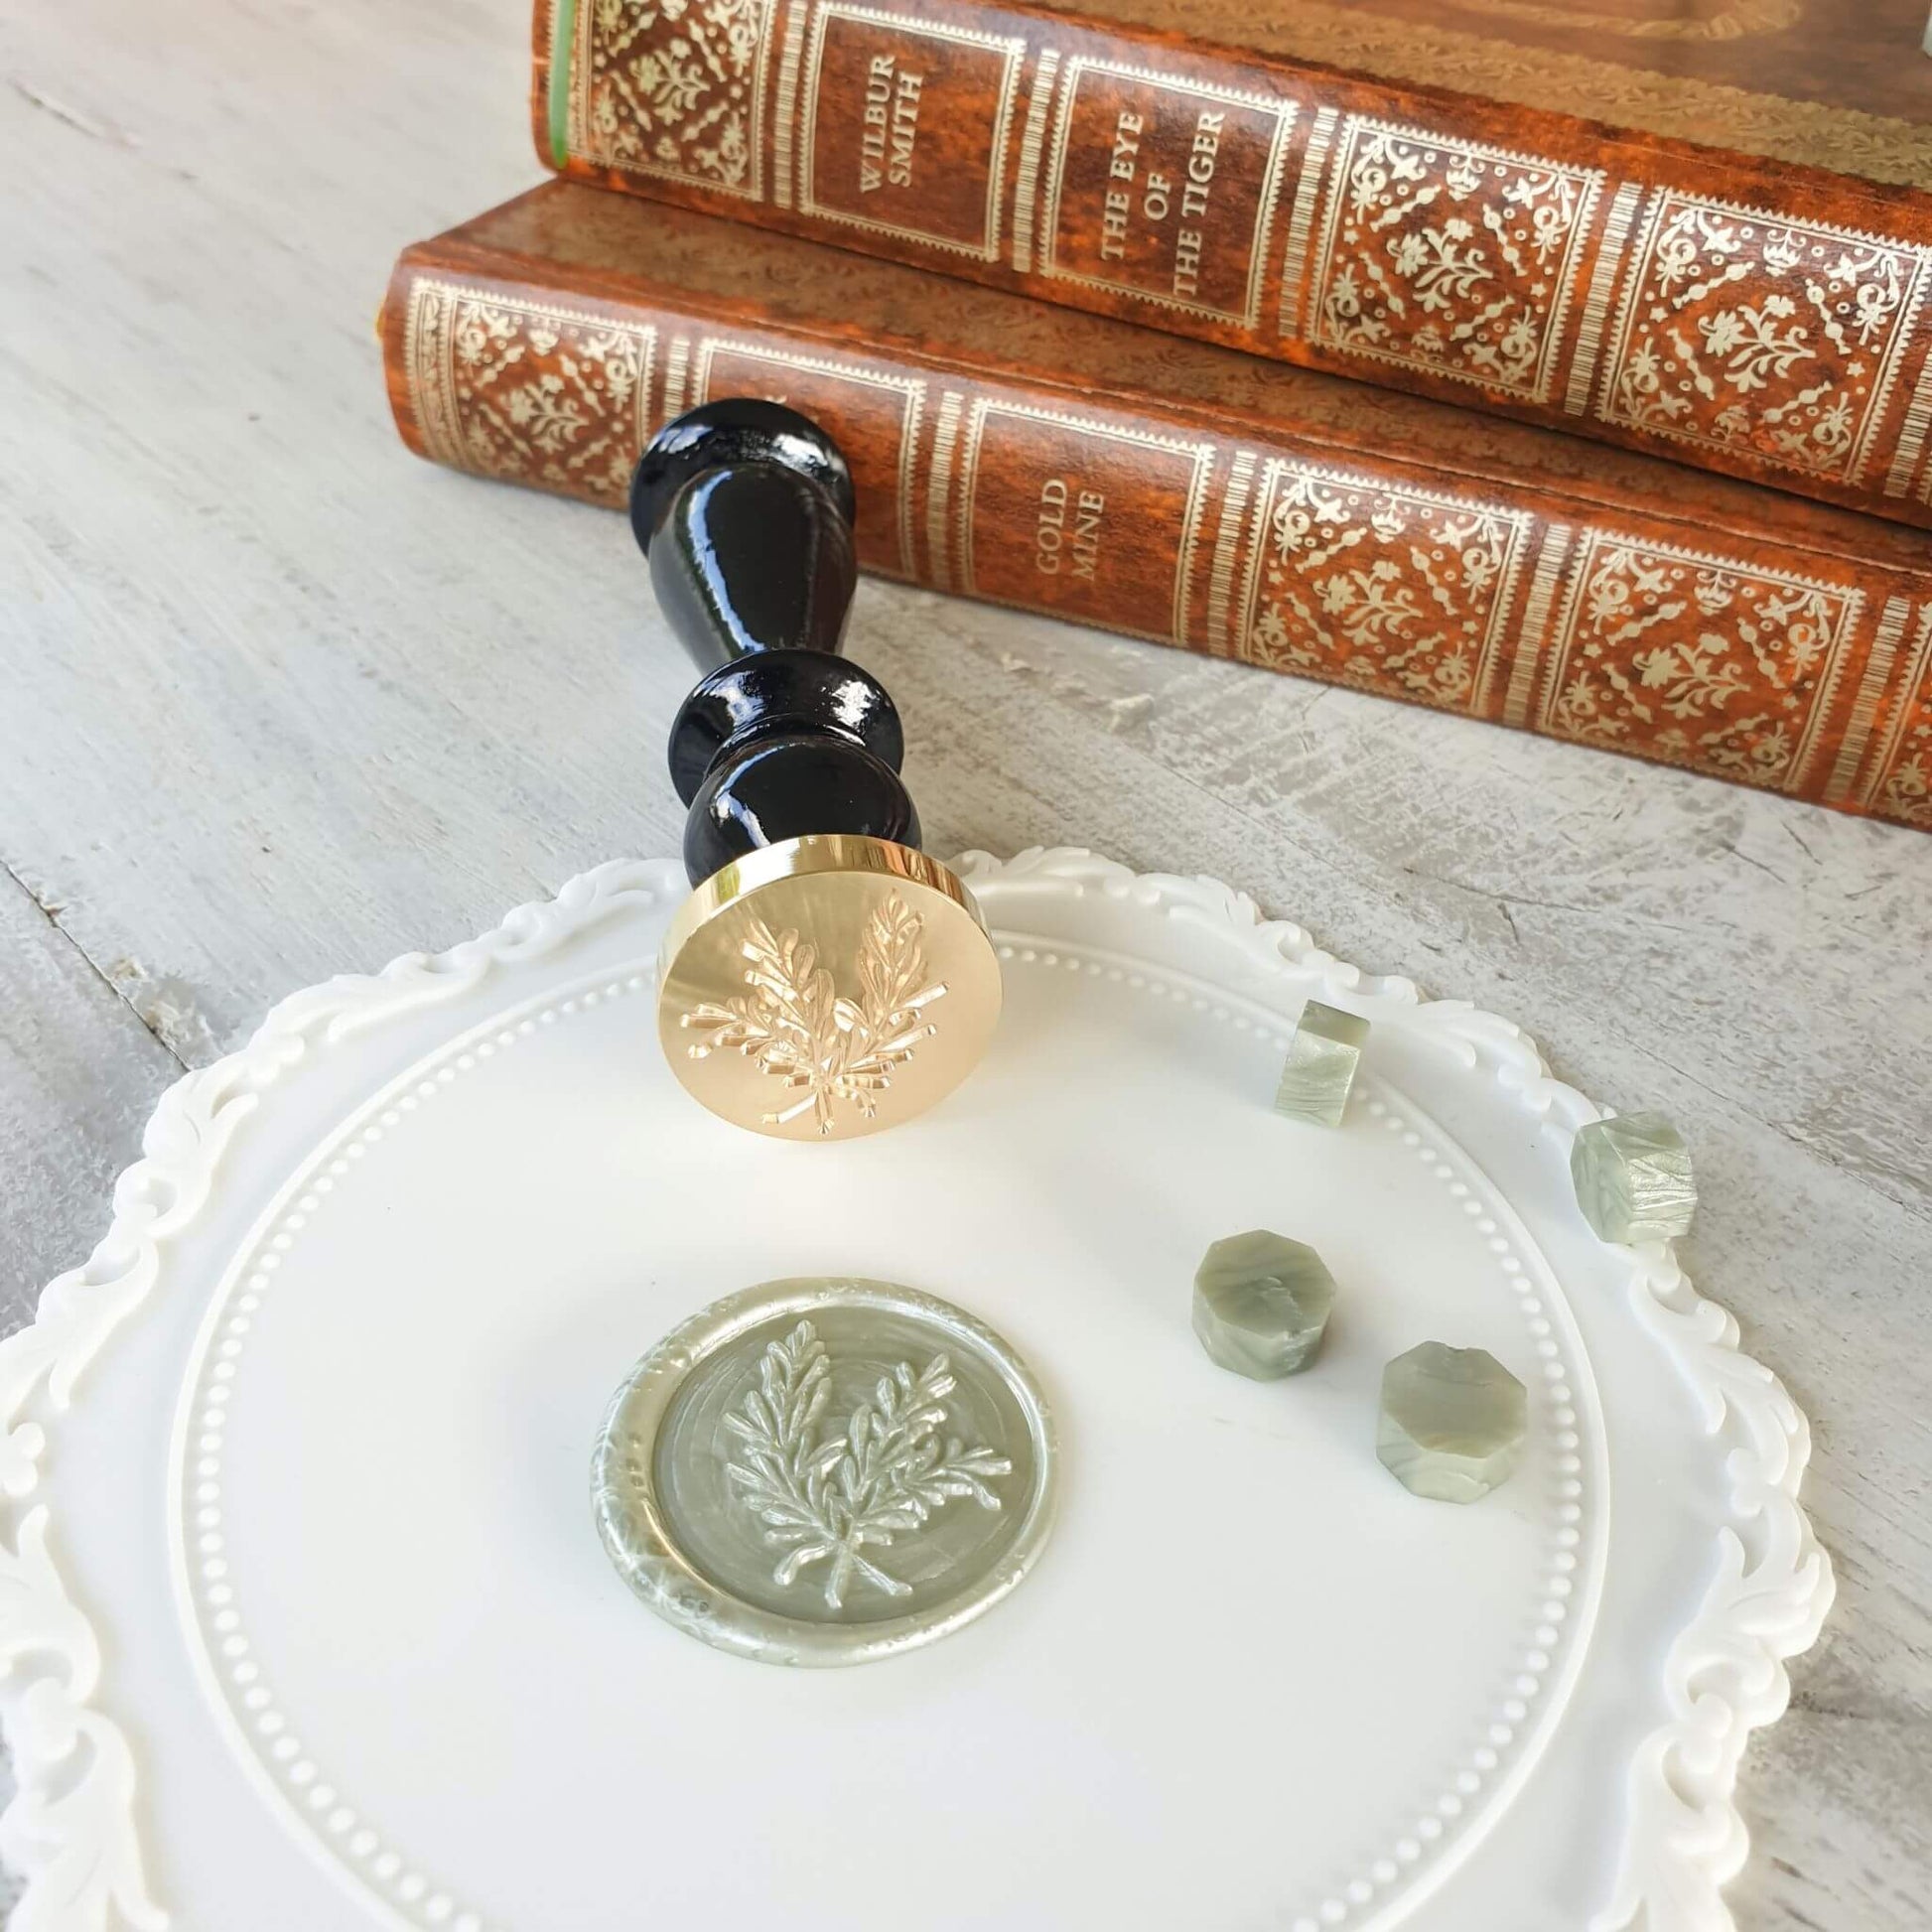 white wax sealing mat in use on table with sage green foliage wax seal, wax seal stamp and sage green wax sealing beads next to vintage books